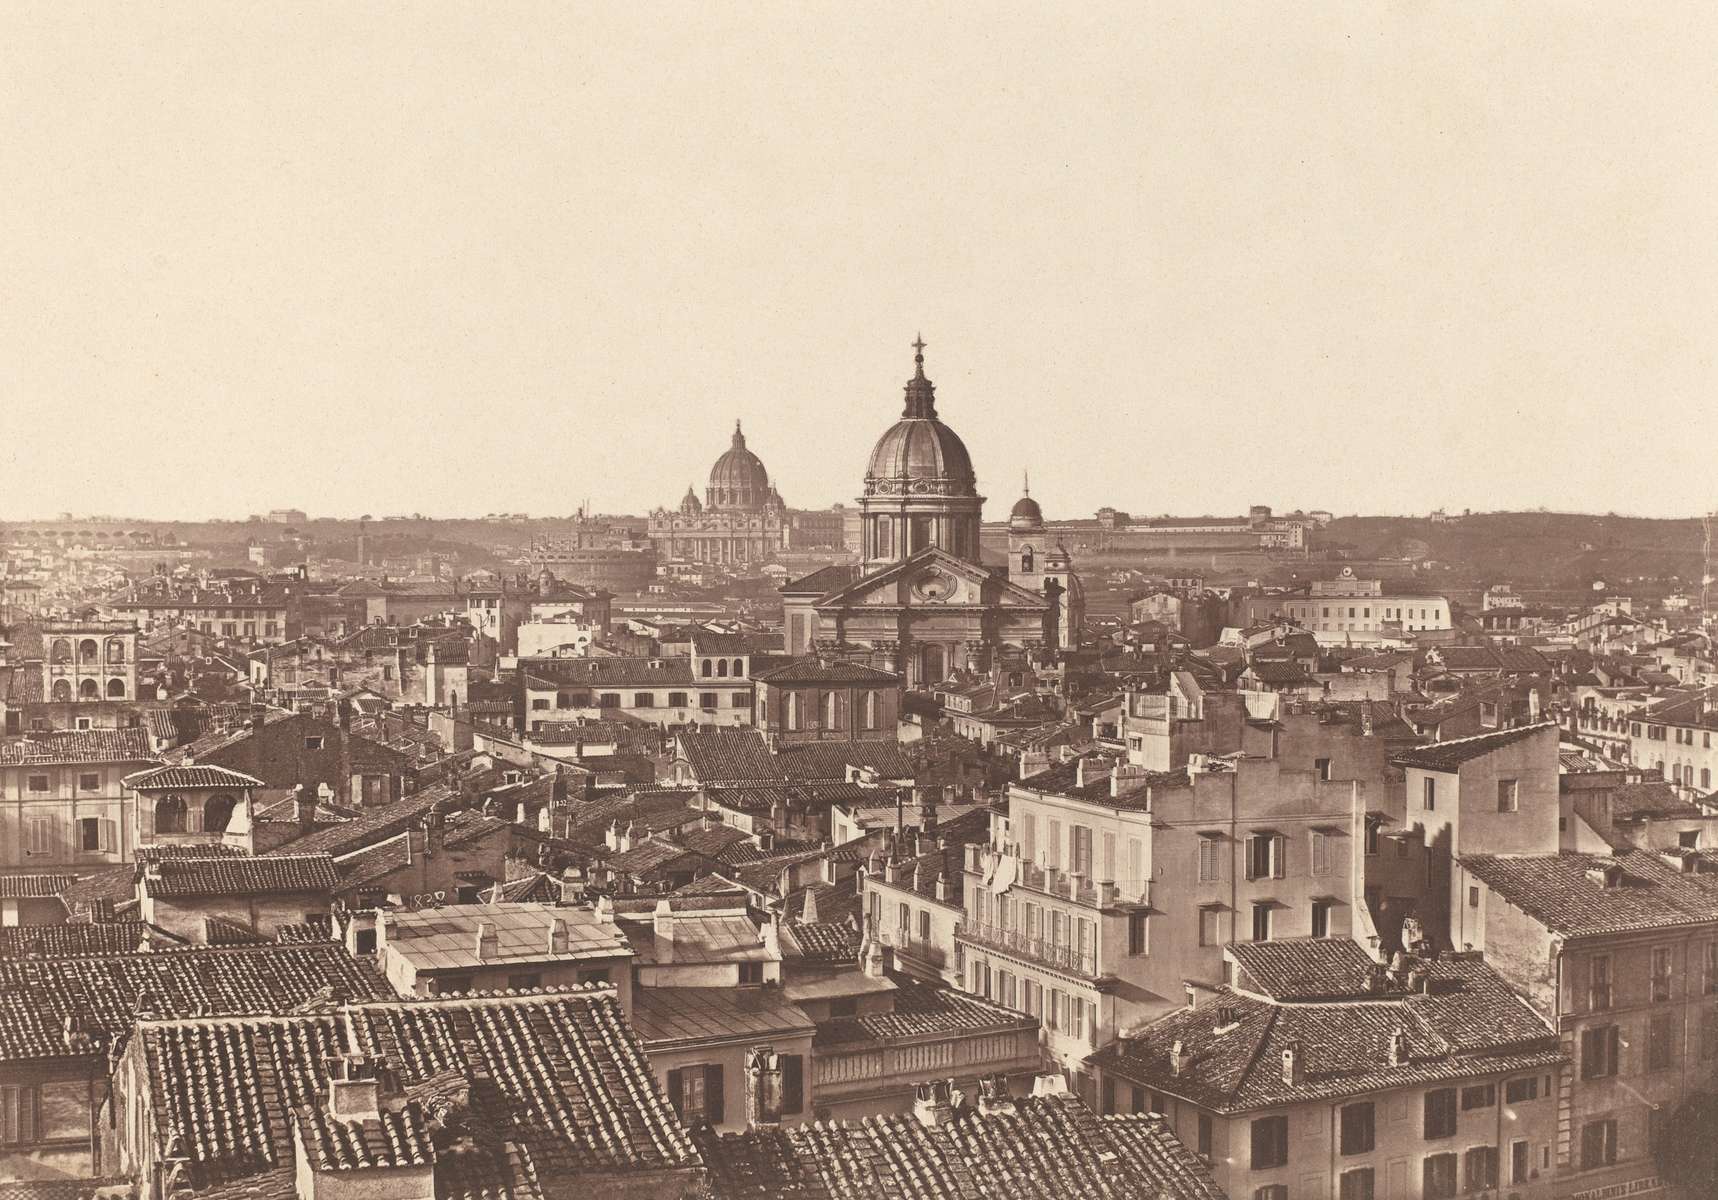 James Anderson (British, 1813 - 1877 ), View of Rome, c. 1855, salted paper print from collodion negative mounted on paper, Horace W. Goldsmith Foundation through Robert and Joyce Menschel